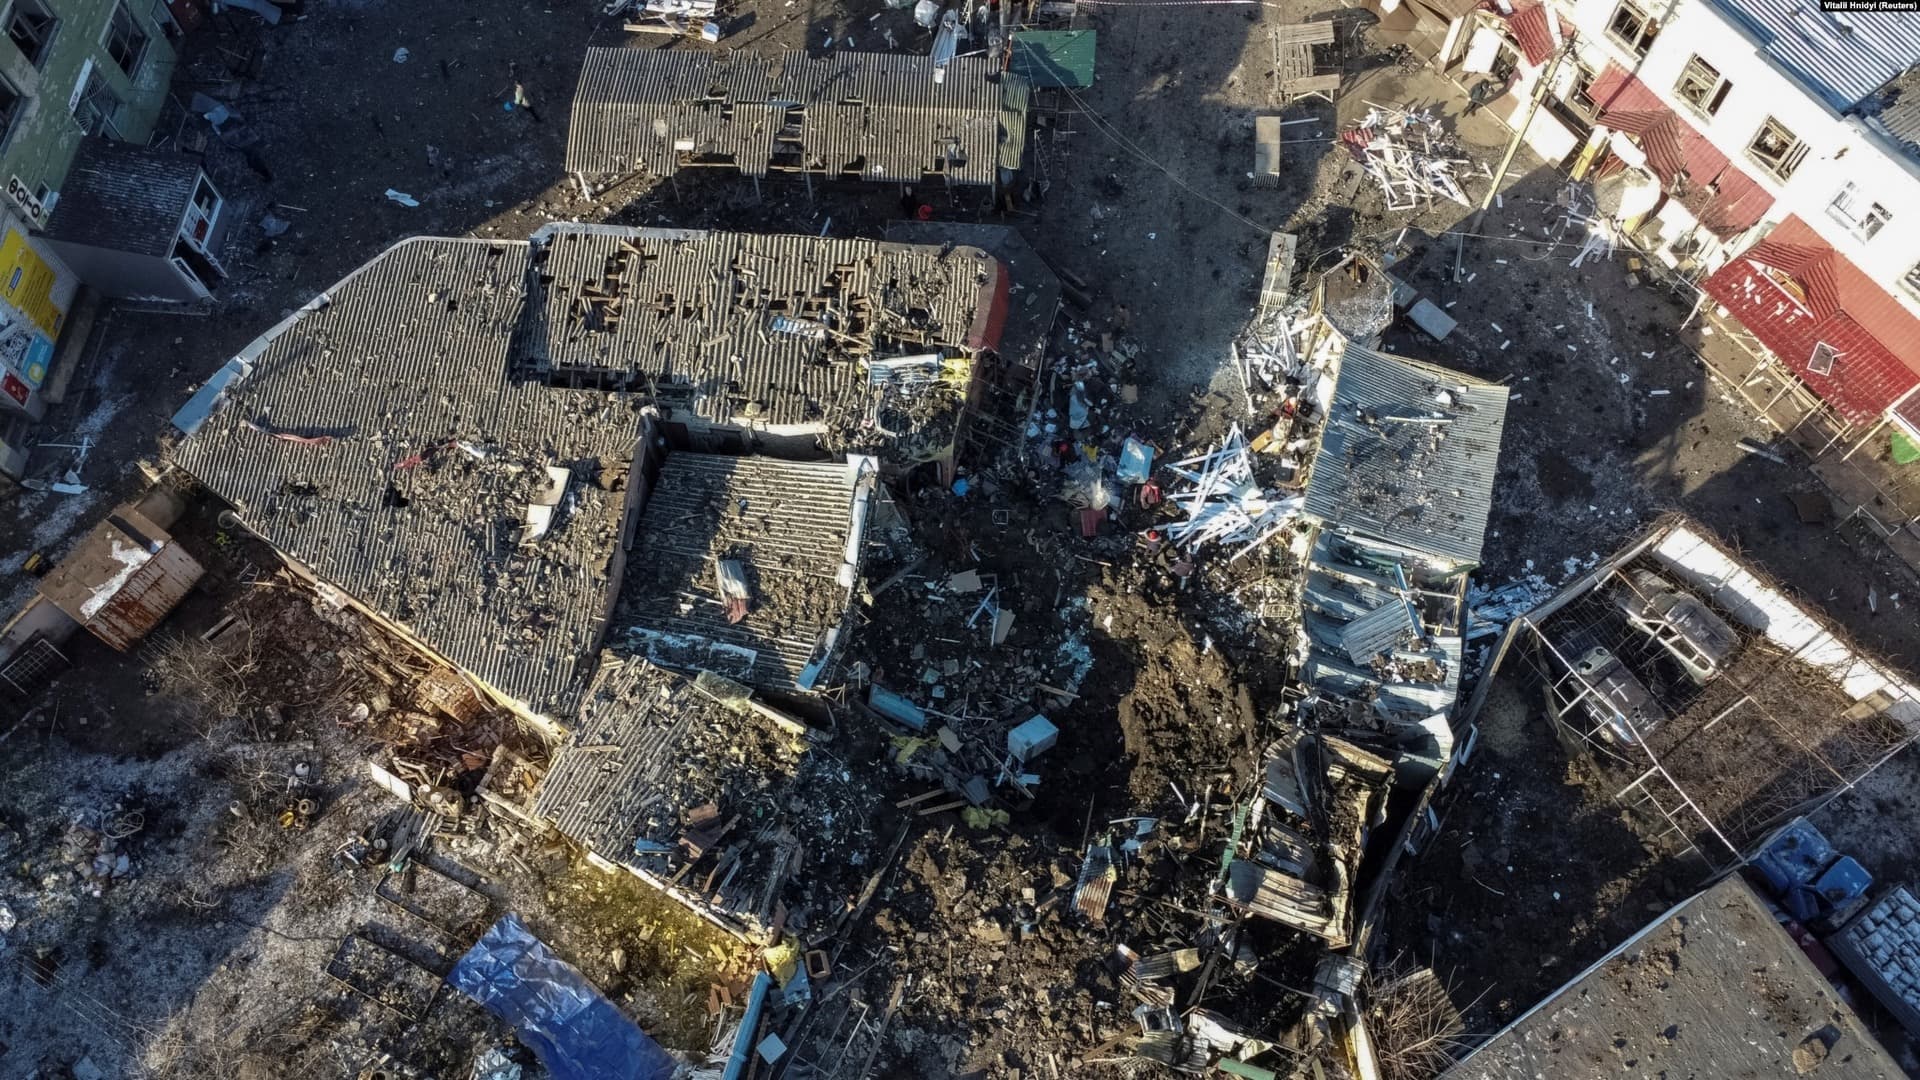 An aerial view shows a local market heavily damaged by a Russian missile strike in the town of Shevchenkove